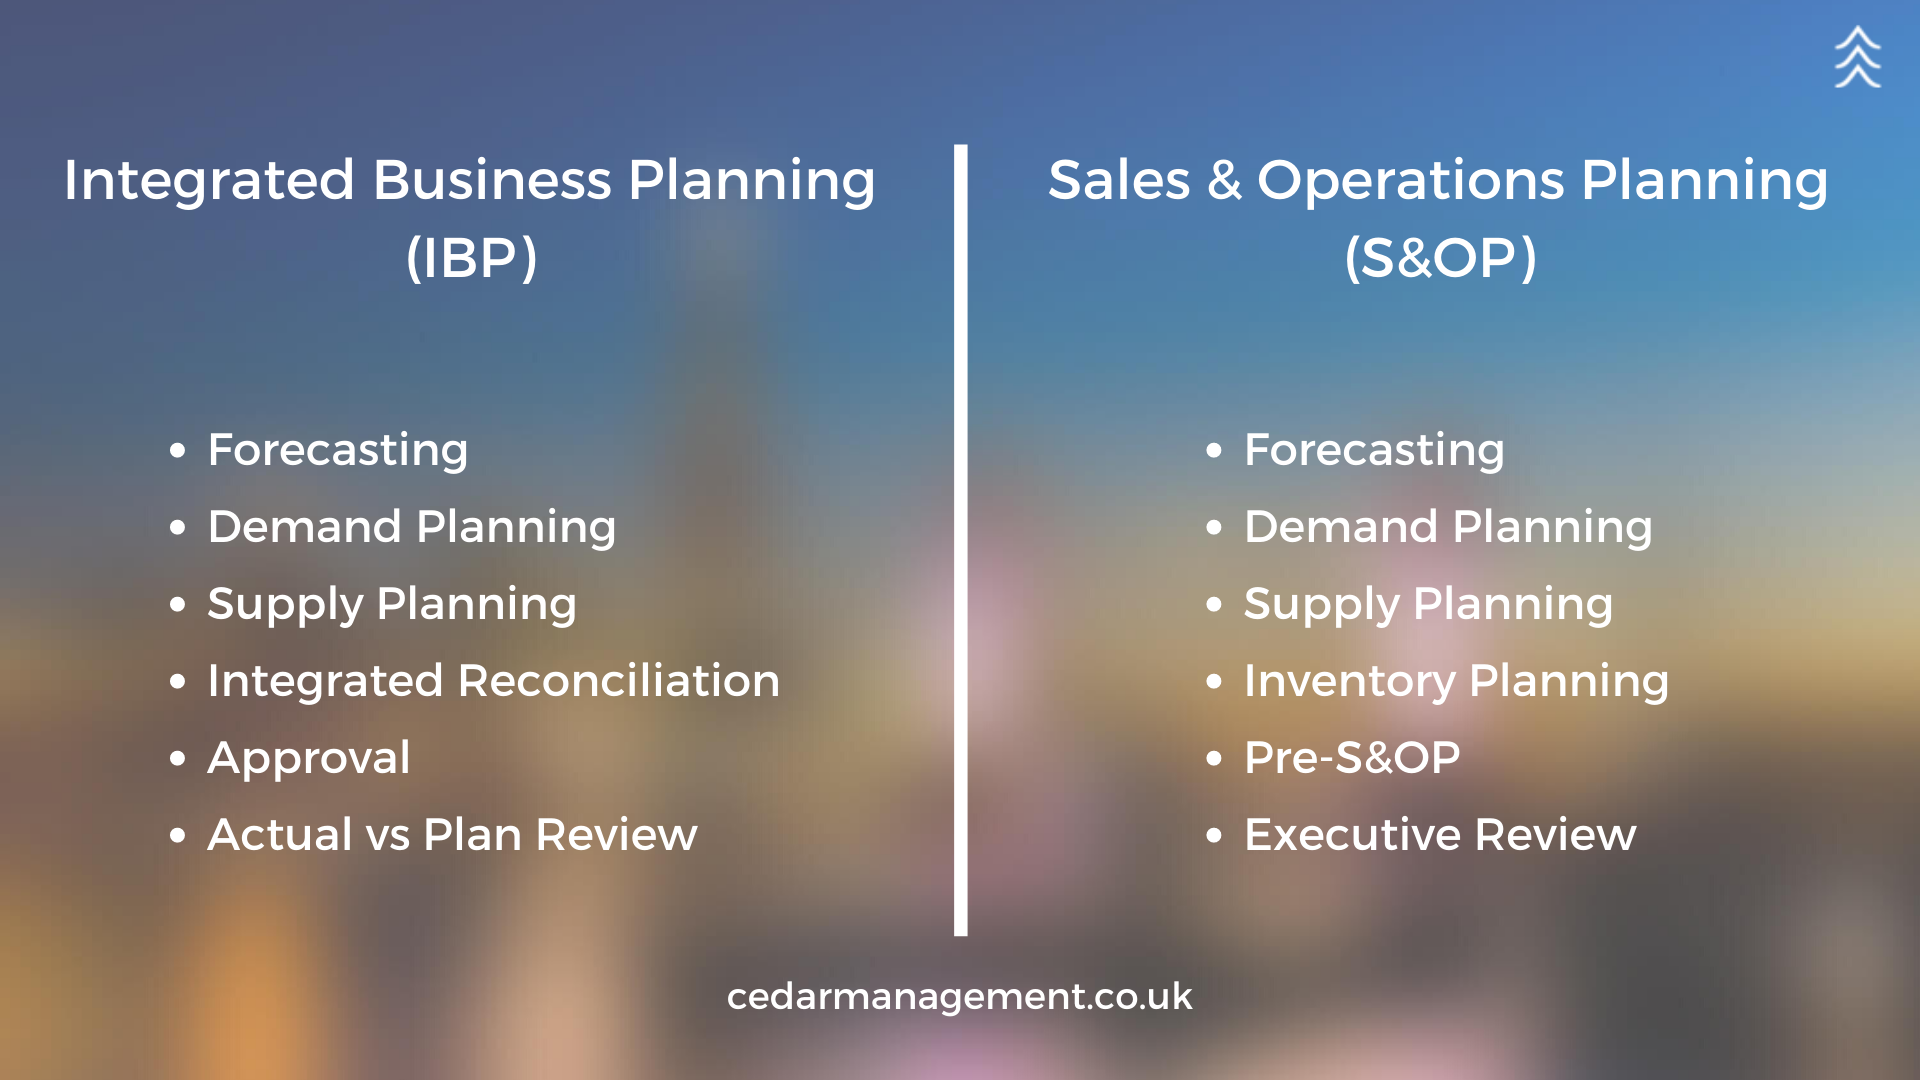 integrated business planning vs s&op